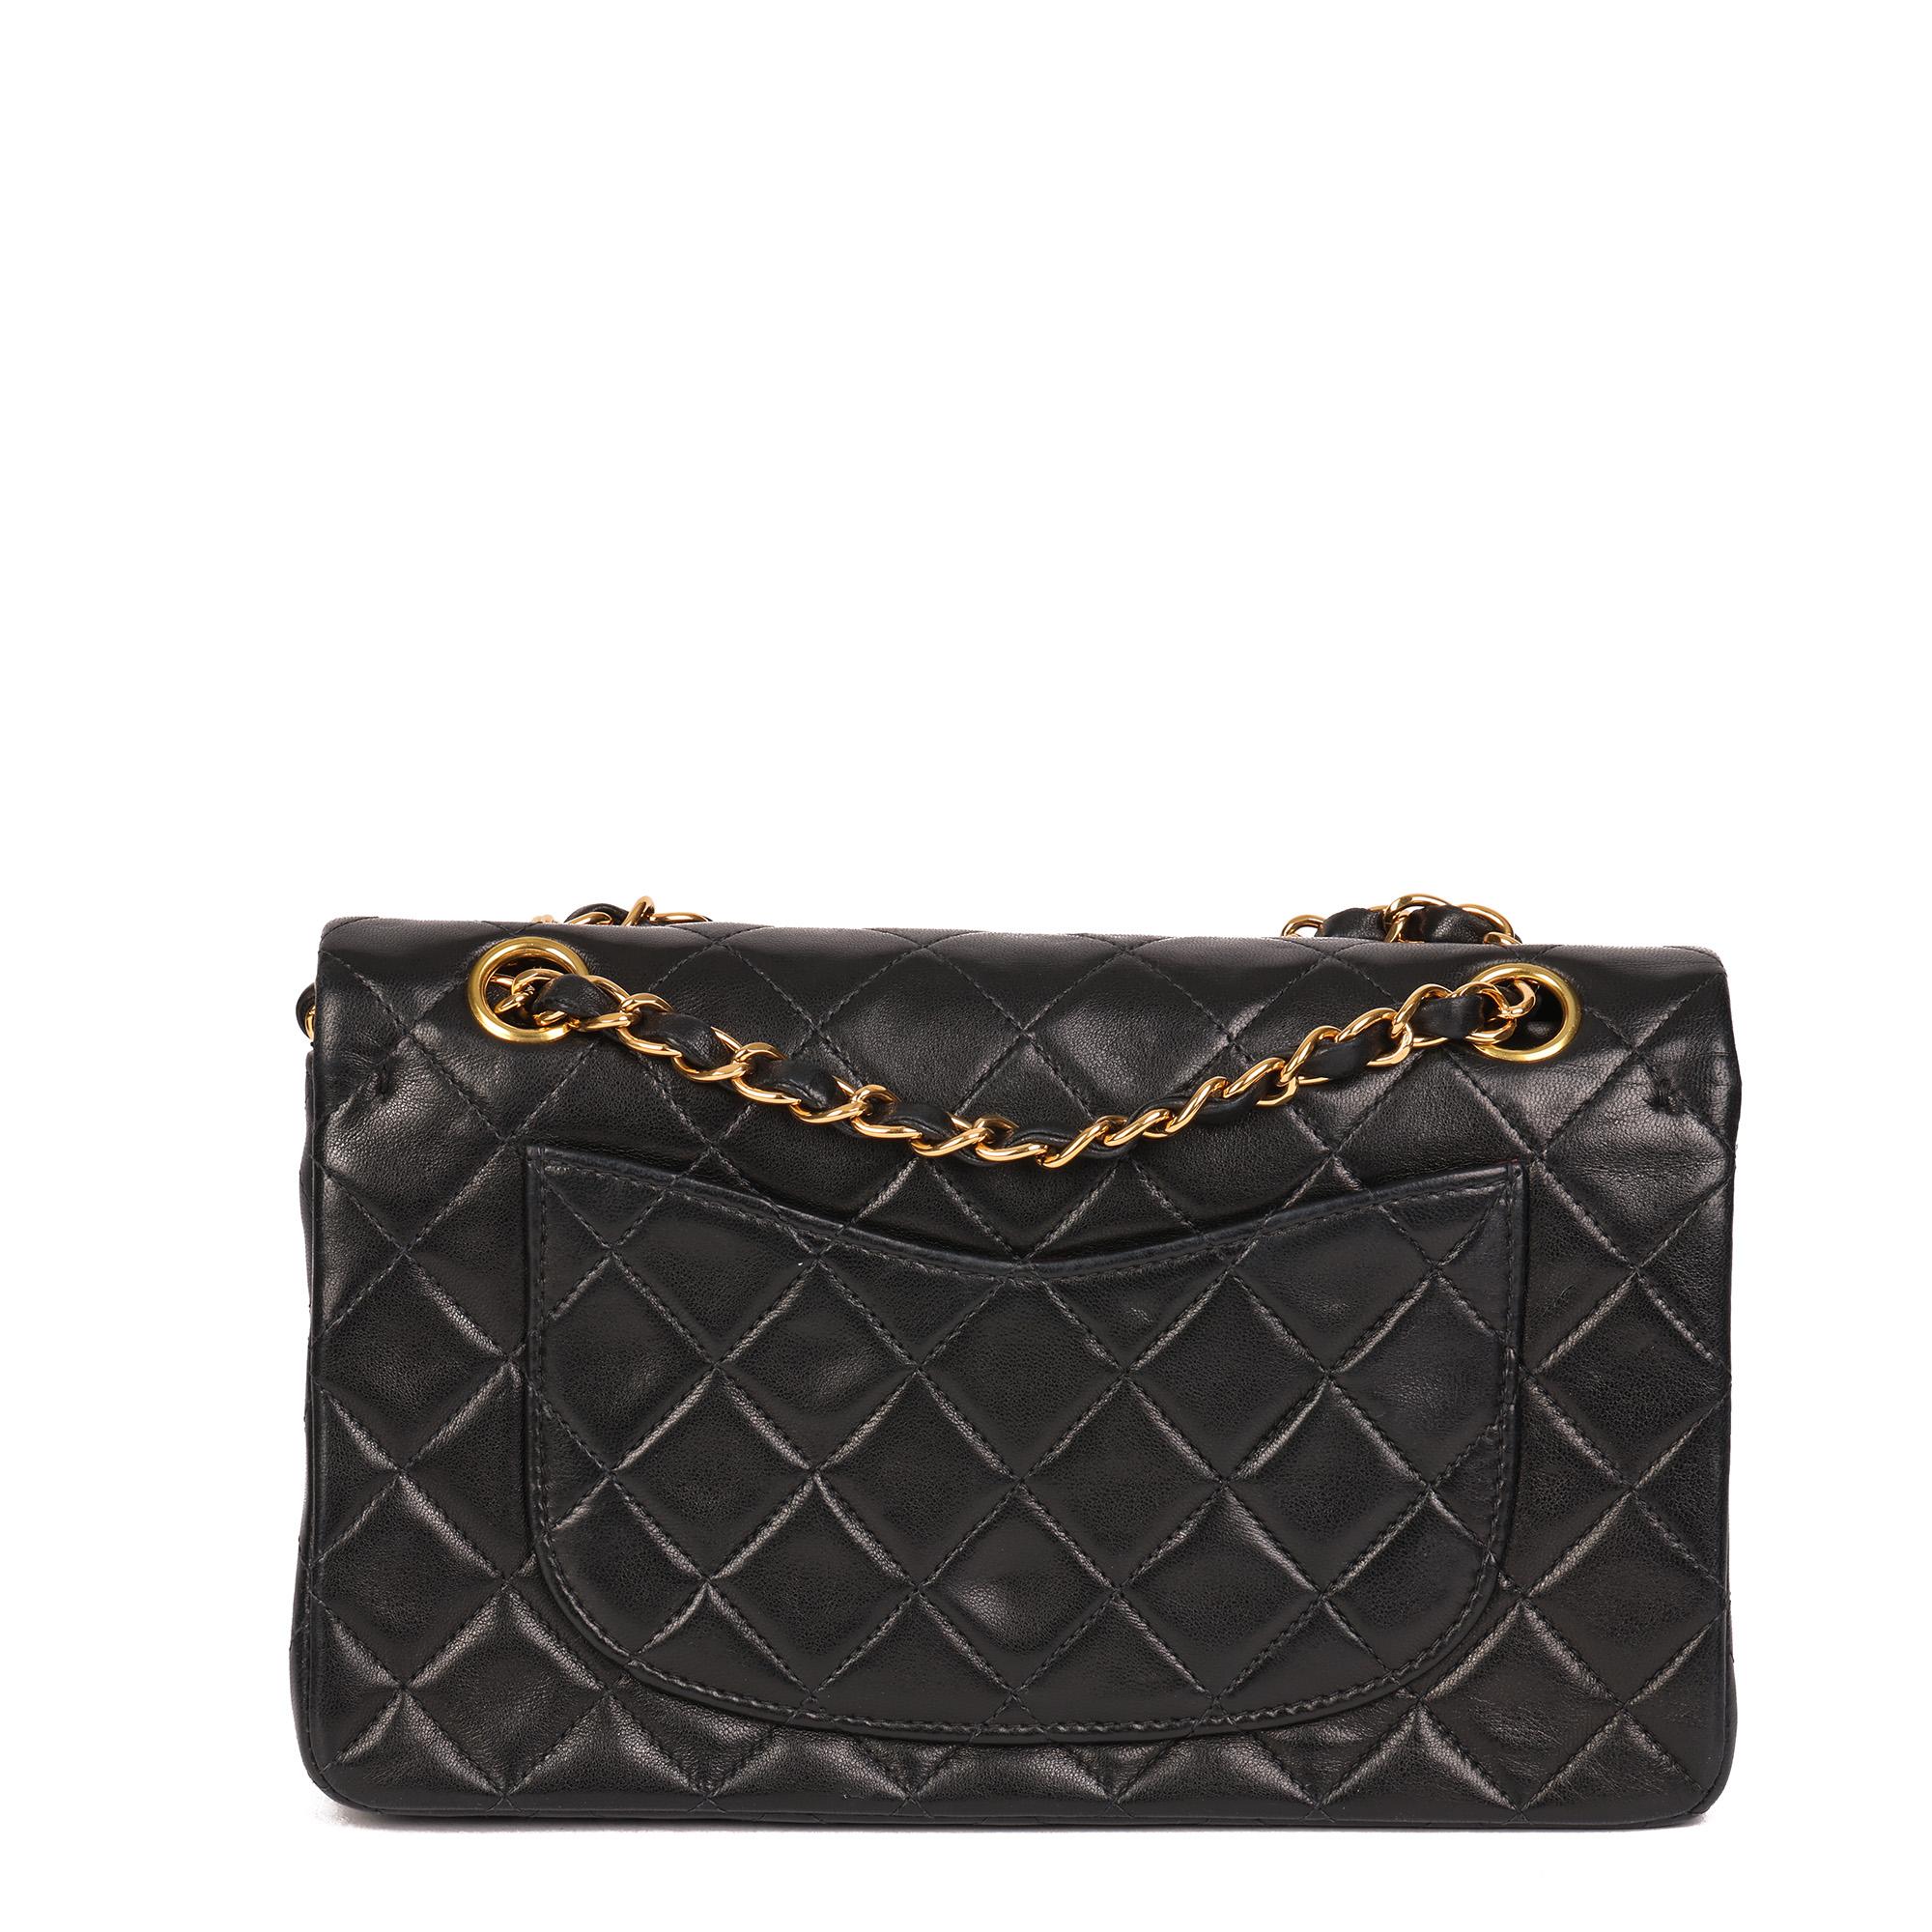 Women's Chanel BLACK QUILTED LAMBSKIN VINTAGE SMALL CLASSIC DOUBLE FLAP BAG